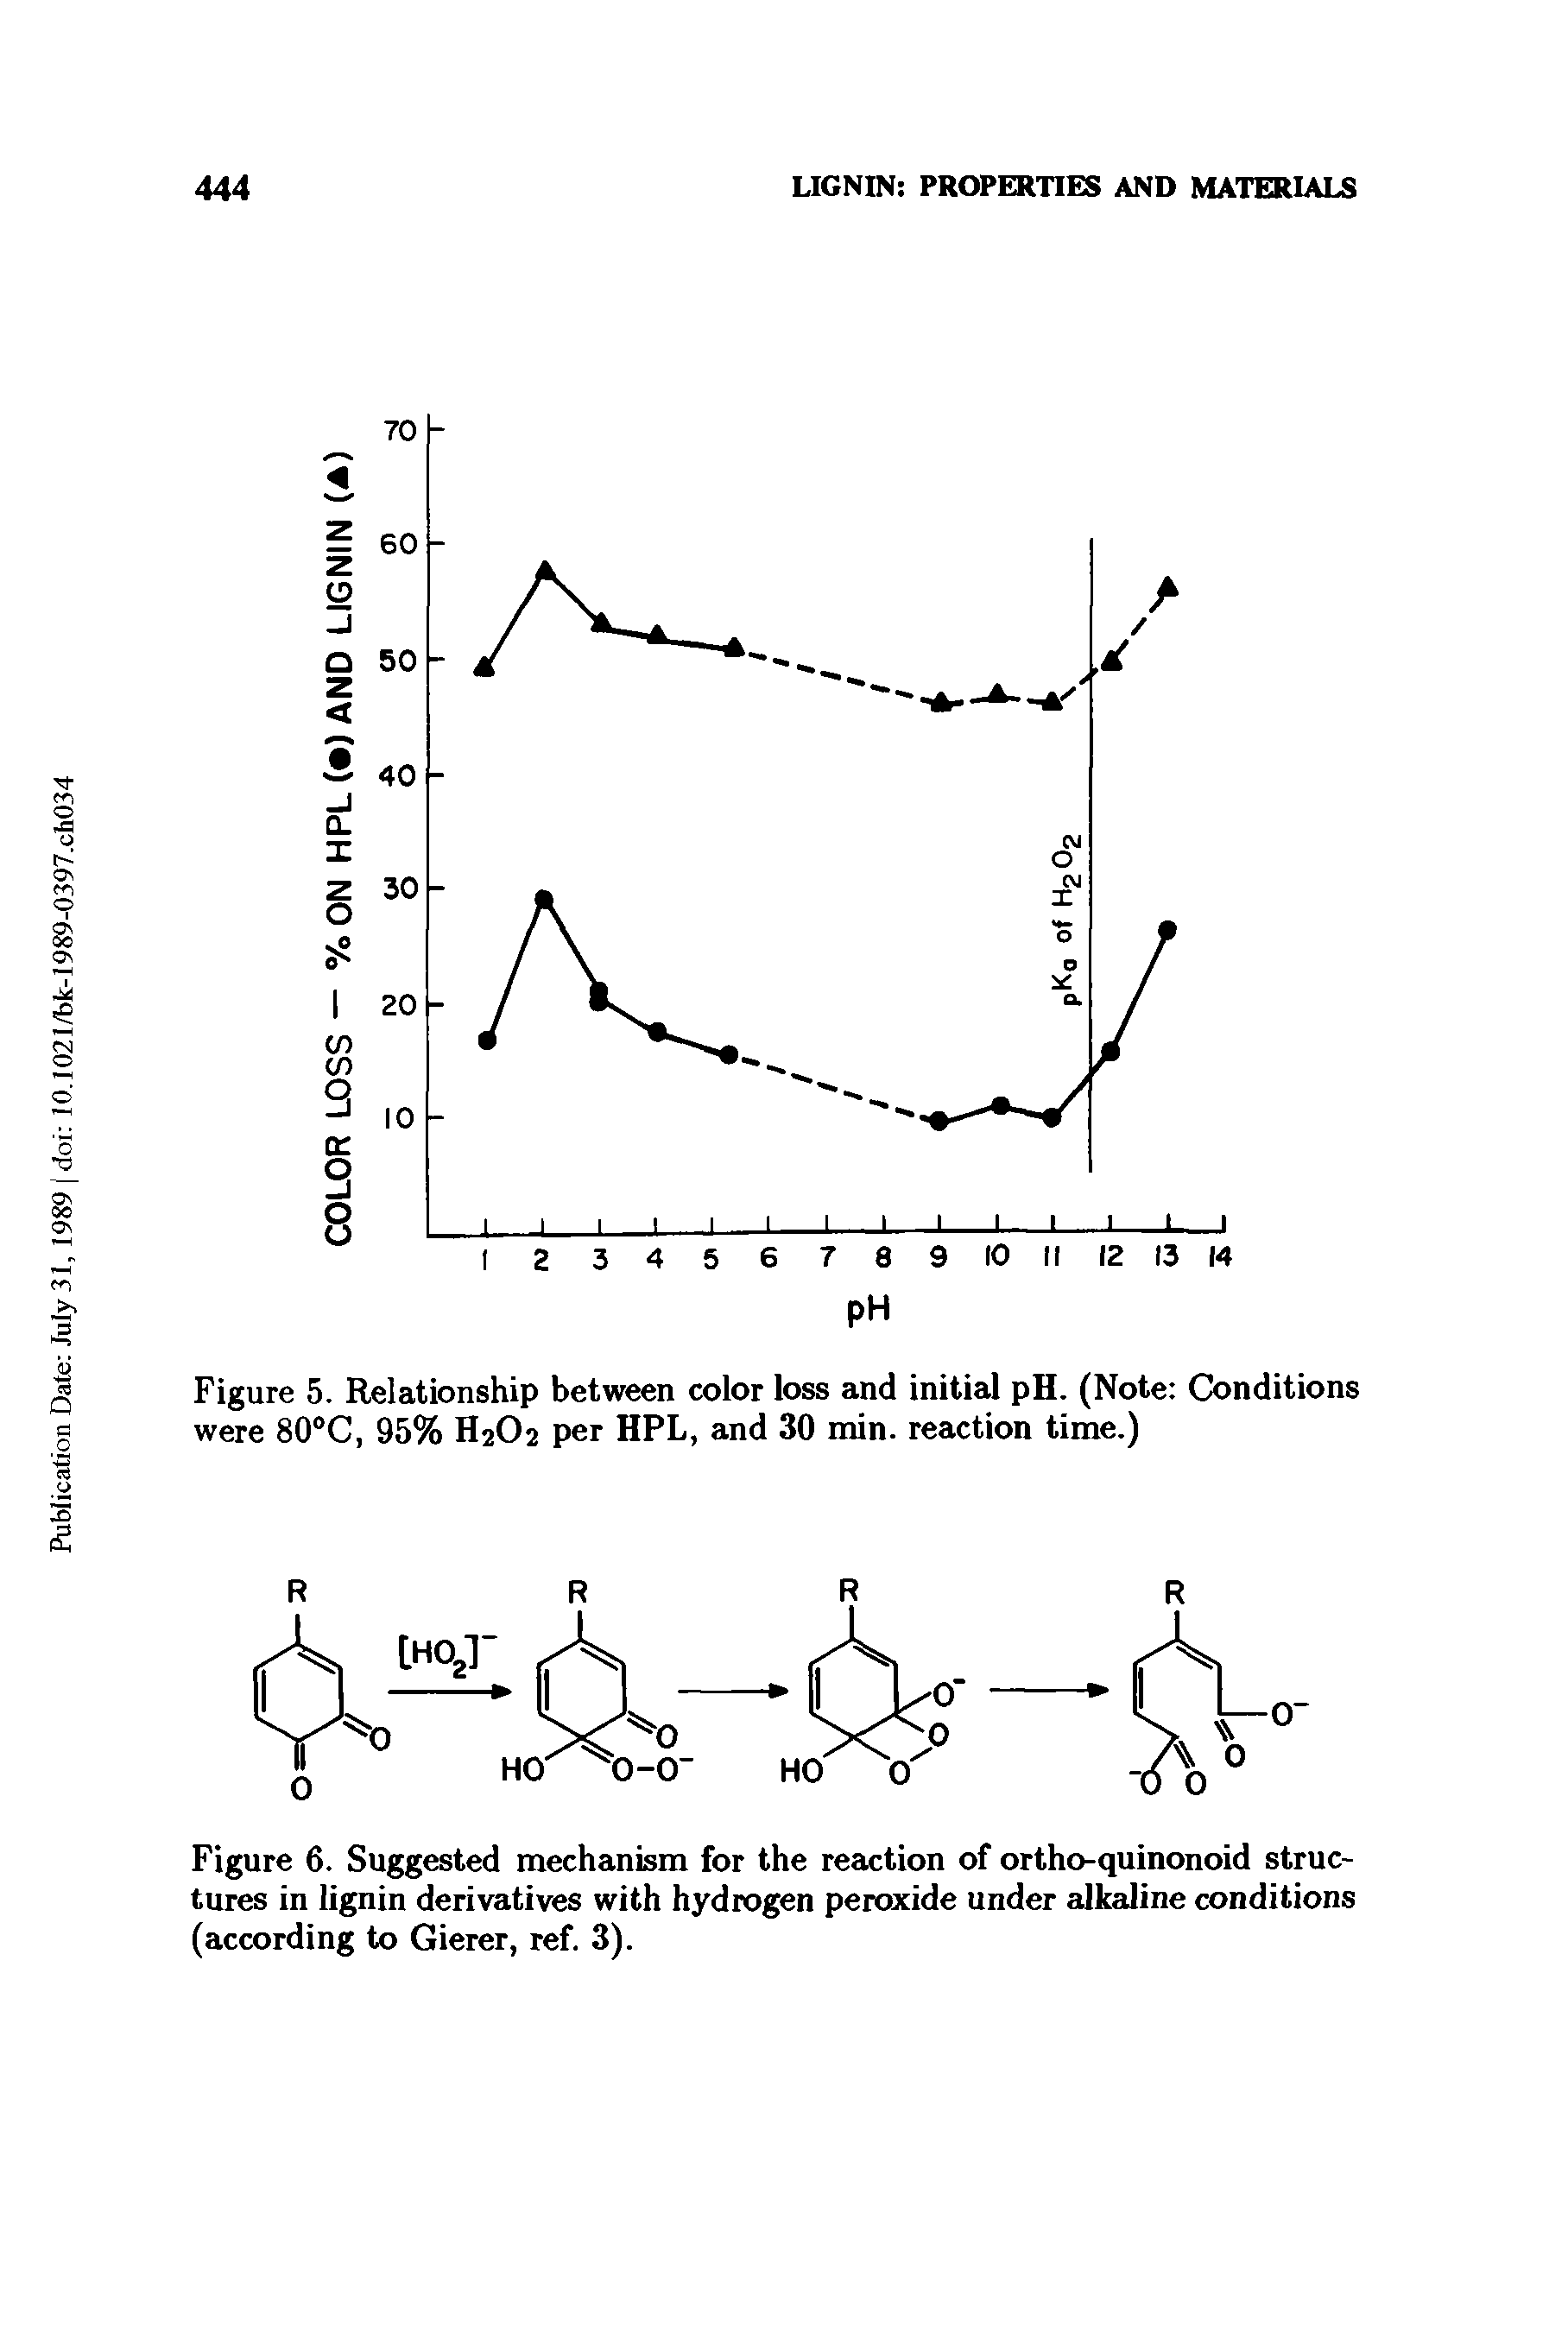 Figure 6. Suggested mechanism for the reaction of ortho-quinonoid structures in lignin derivatives with hydrogen peroxide under alkaline conditions (according to Gierer, ref. 3).